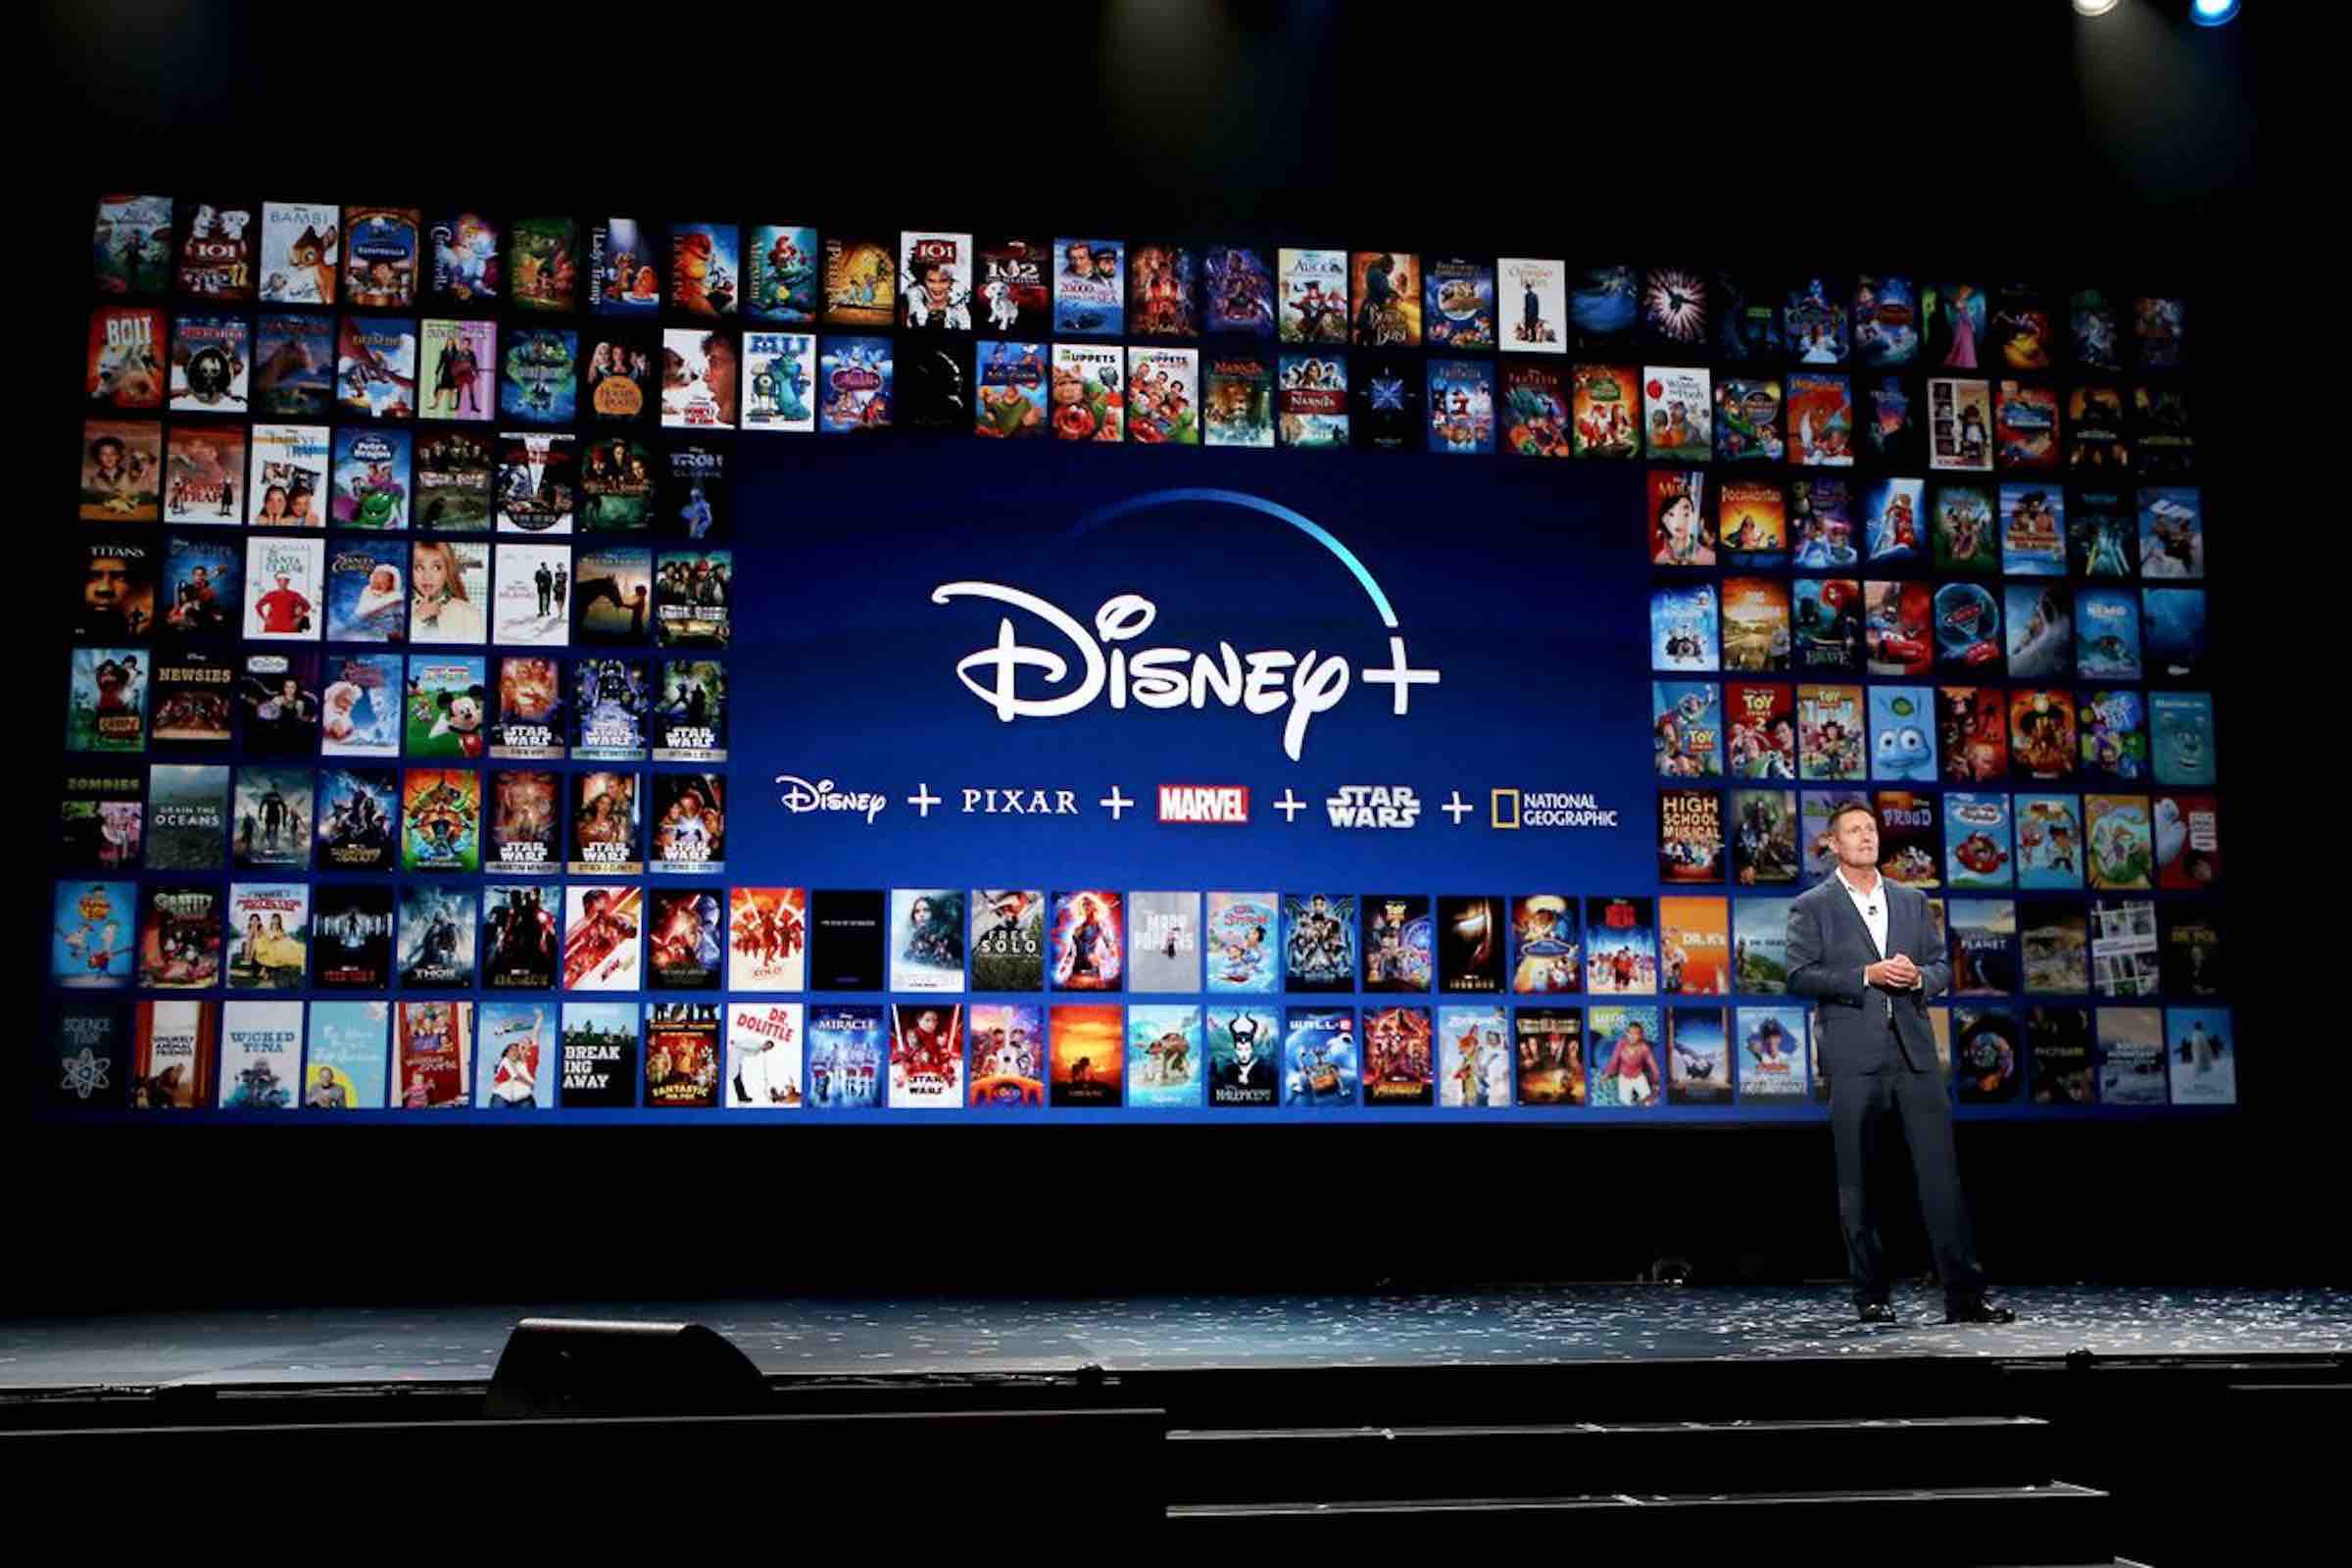 It’s no surprise Disney is pushing Marvel fans to subscribe to streaming service Disney+, given all the MCU content planned, such as 'Ms. Marvel'.